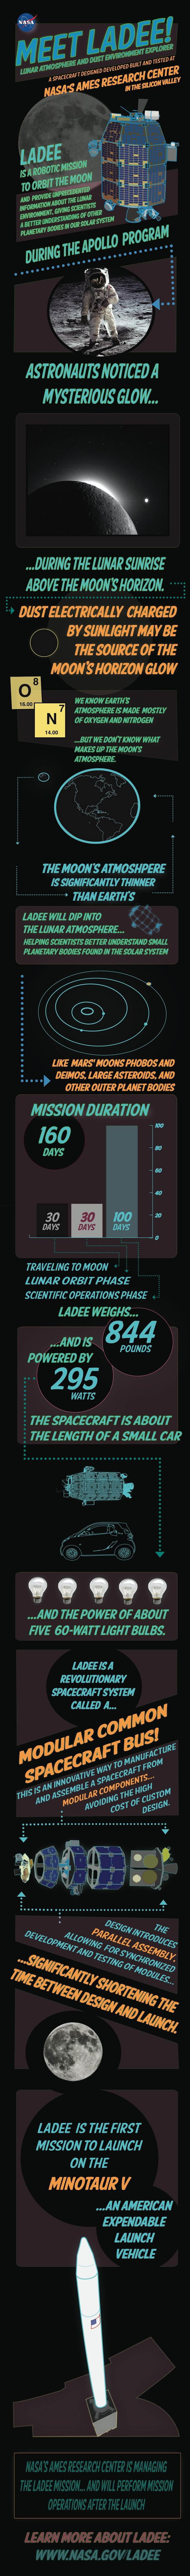 Scroll through the Lunar Atmosphere and Dust Environment Explorer (LADEE) infographic to learn about the mission.